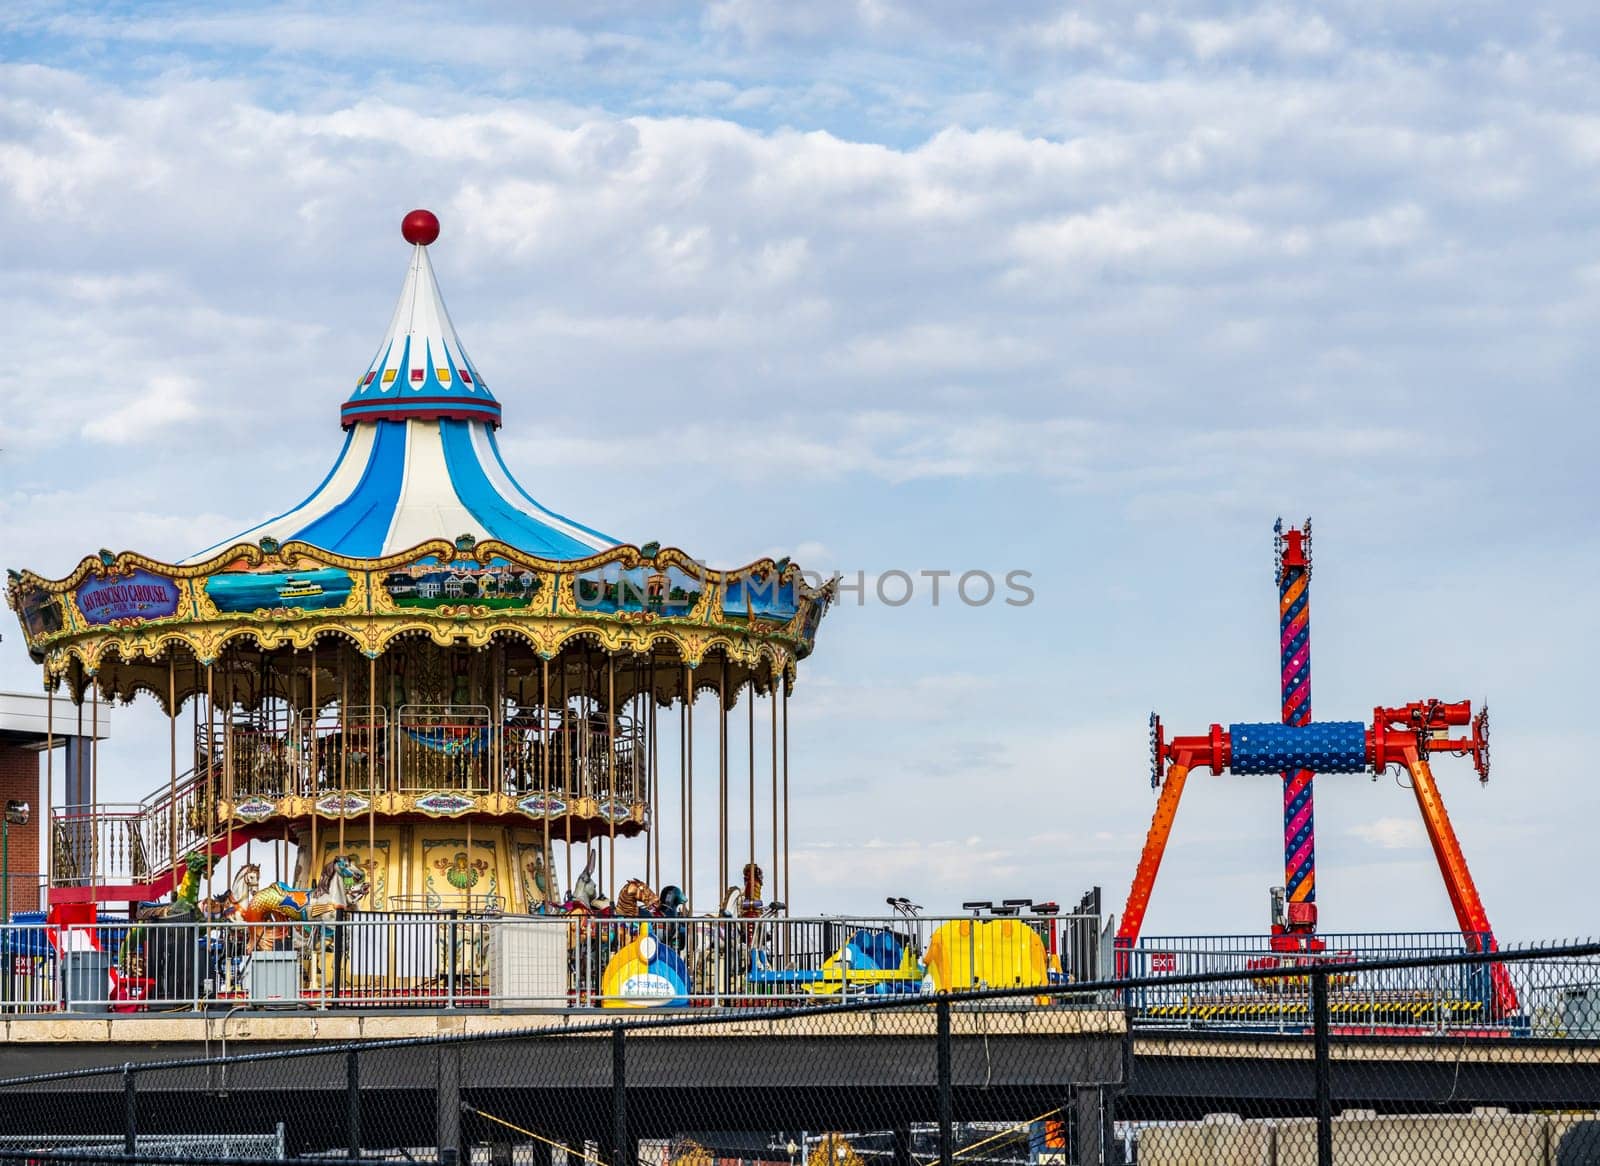 Dismantling fairground rides in Davenport Iowa at end of season by steheap